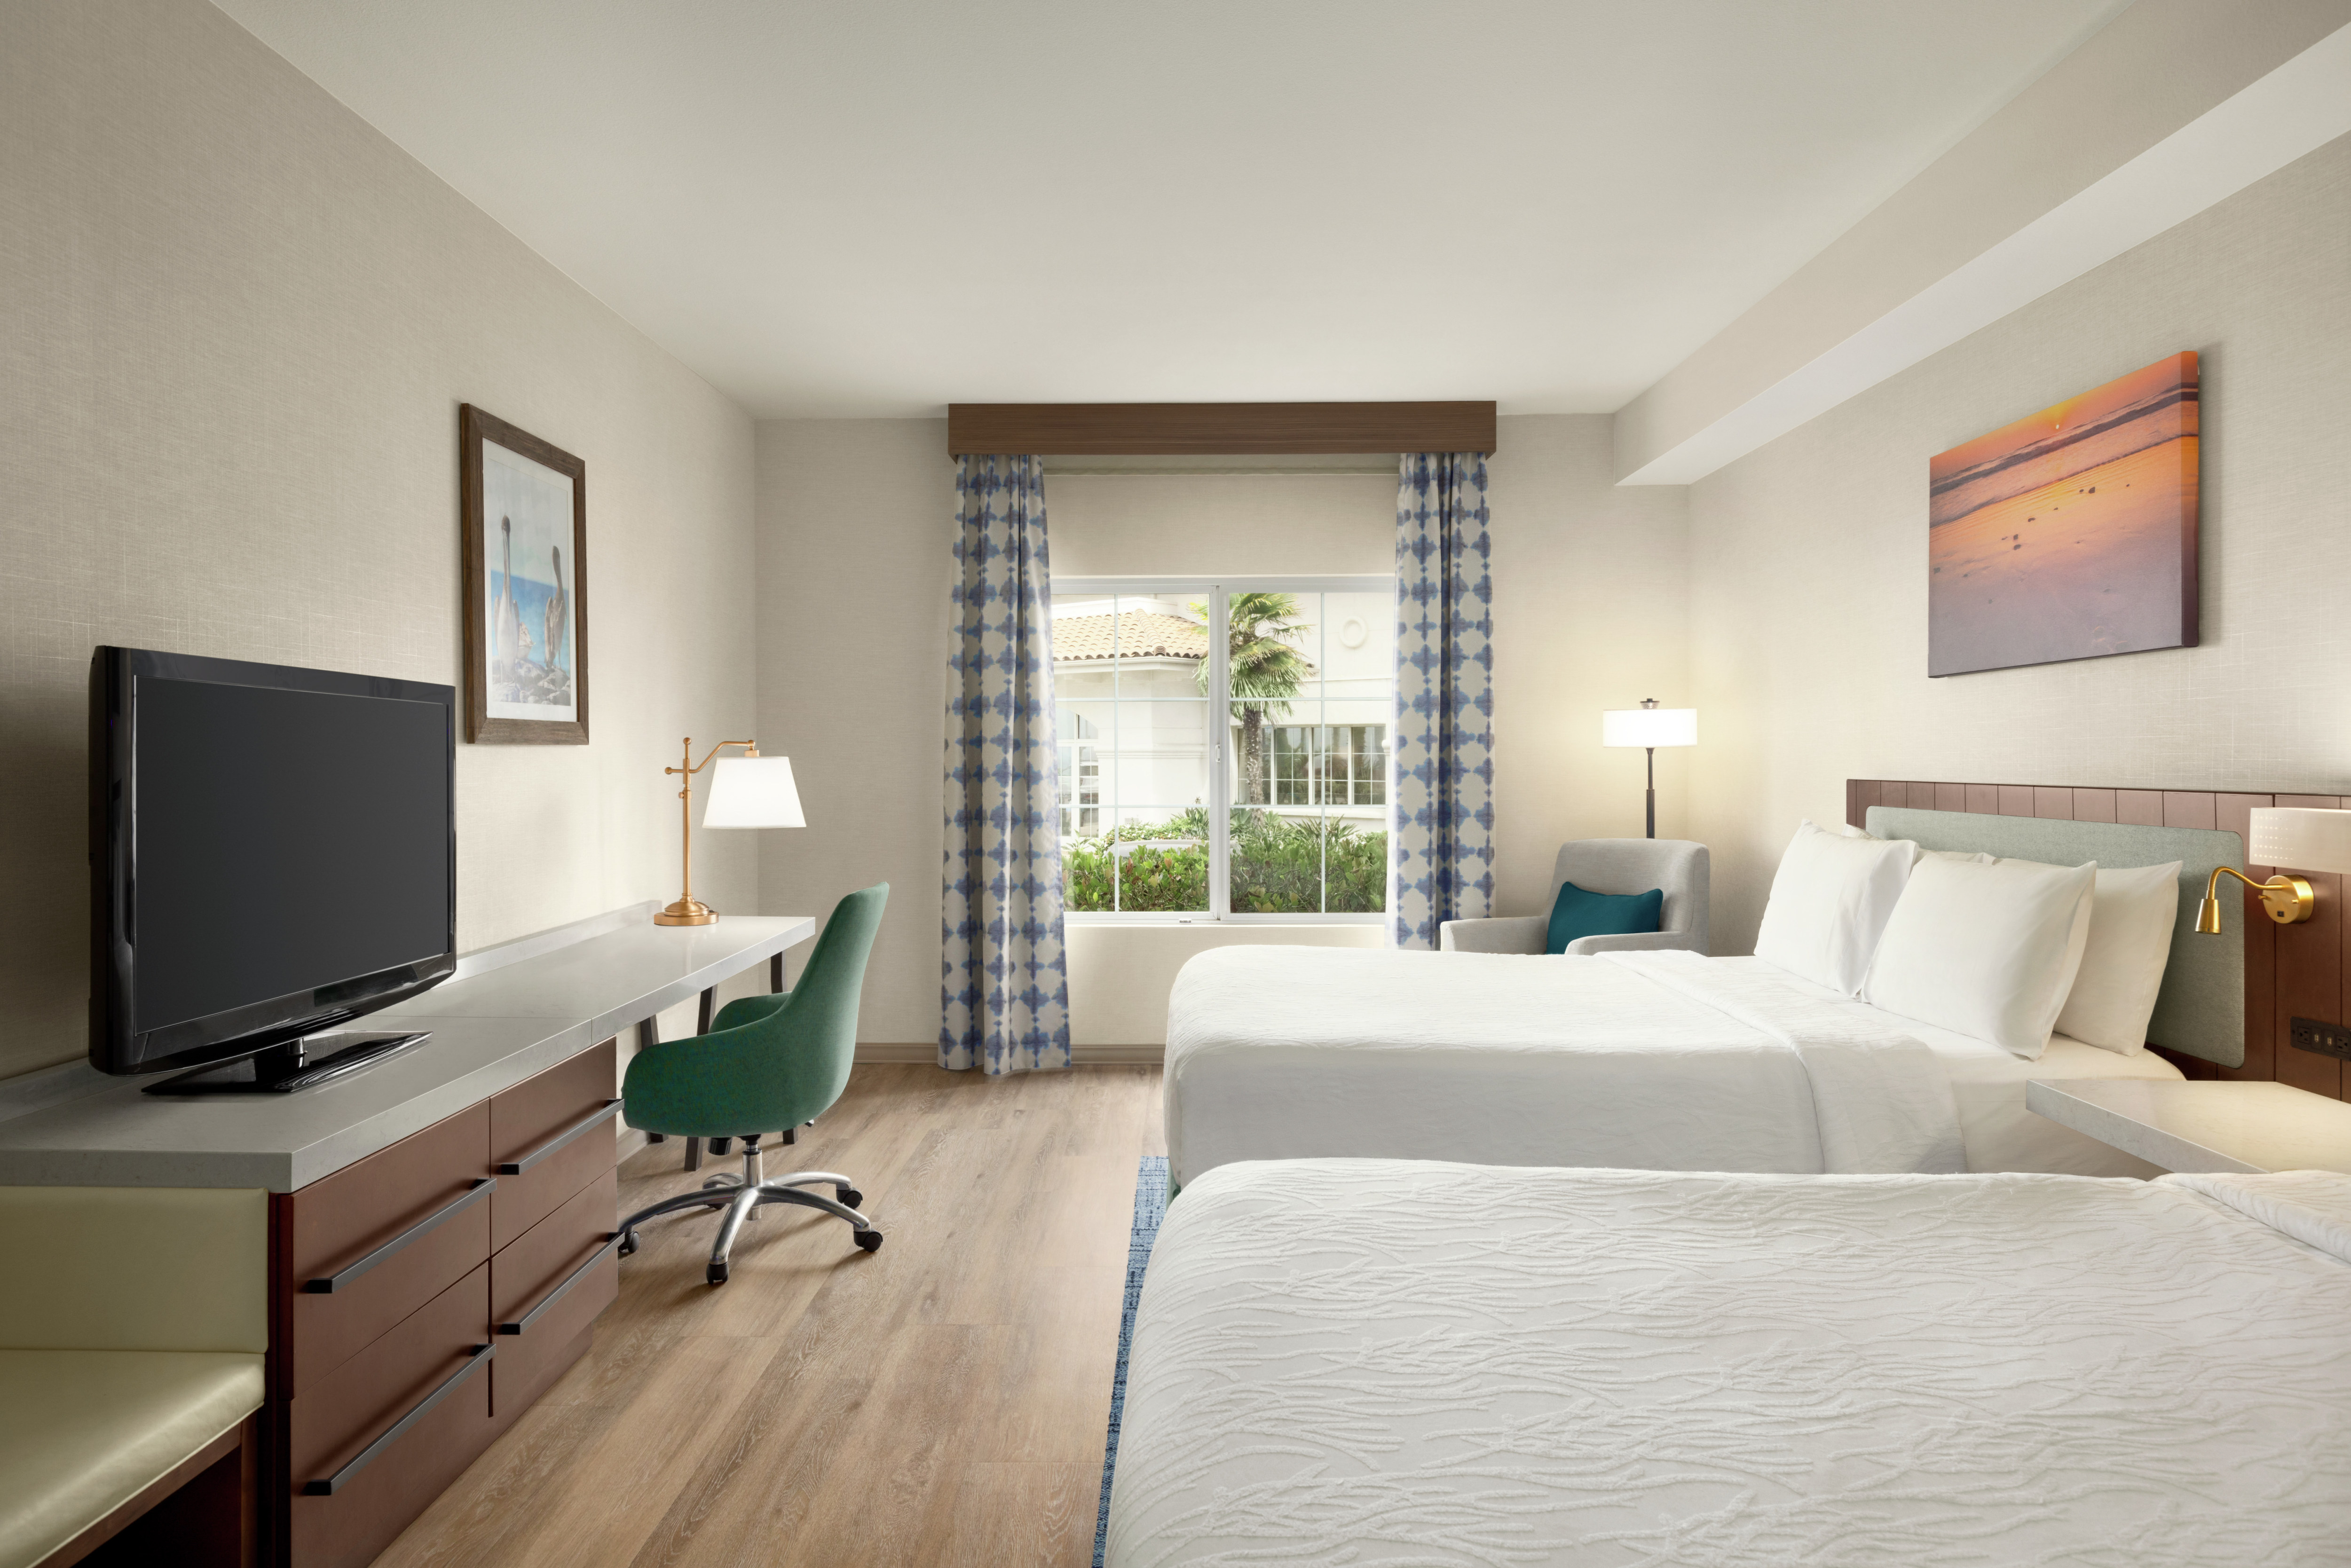 Spacious guest room featuring two comfortable queen beds, TV, work desk, and outside view.